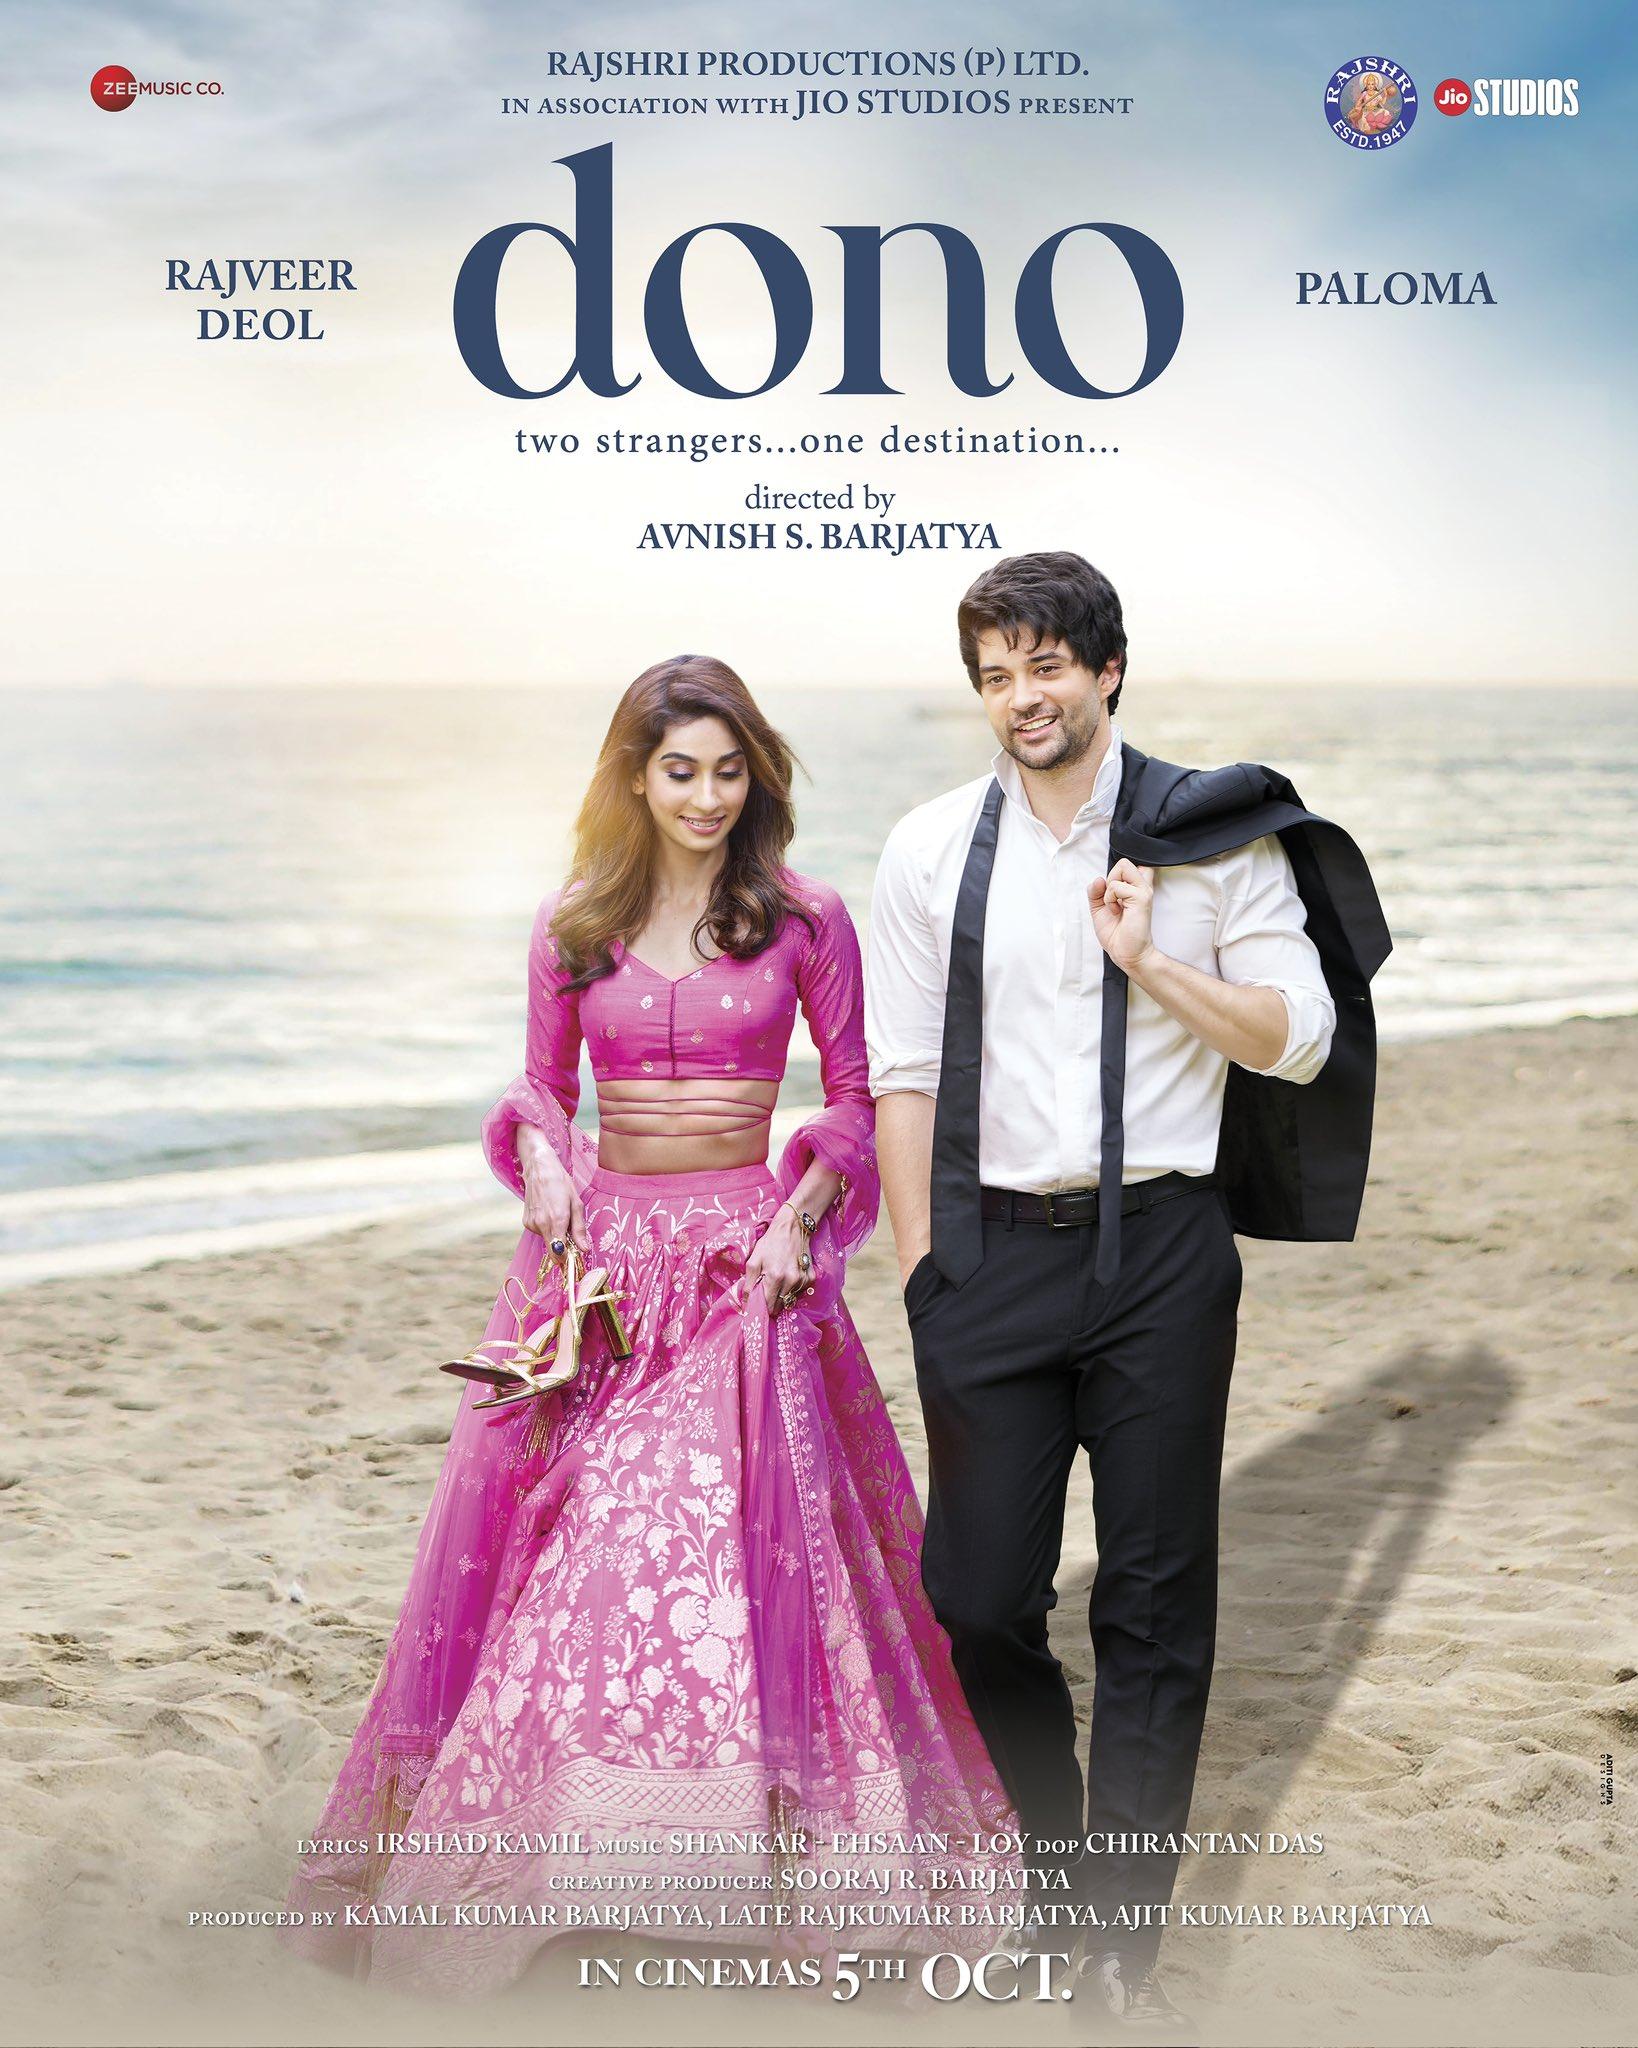 Dono - 5 October
'Dono,' a theatrical masterpiece, transports audiences to a world of modern relationships, skillfully weaving together the threads of love, conflict, and connection. Against the backdrop of a lavish destination wedding, viewers are treated to a visually stunning and emotionally resonant yet humorous journey. Rajveer Deol's upcoming performance adds an exciting touch to this tale of love and complexity. 'Dono' is a must-watch theater experience that immerses the audience in the beauty and intricacies of human connections.